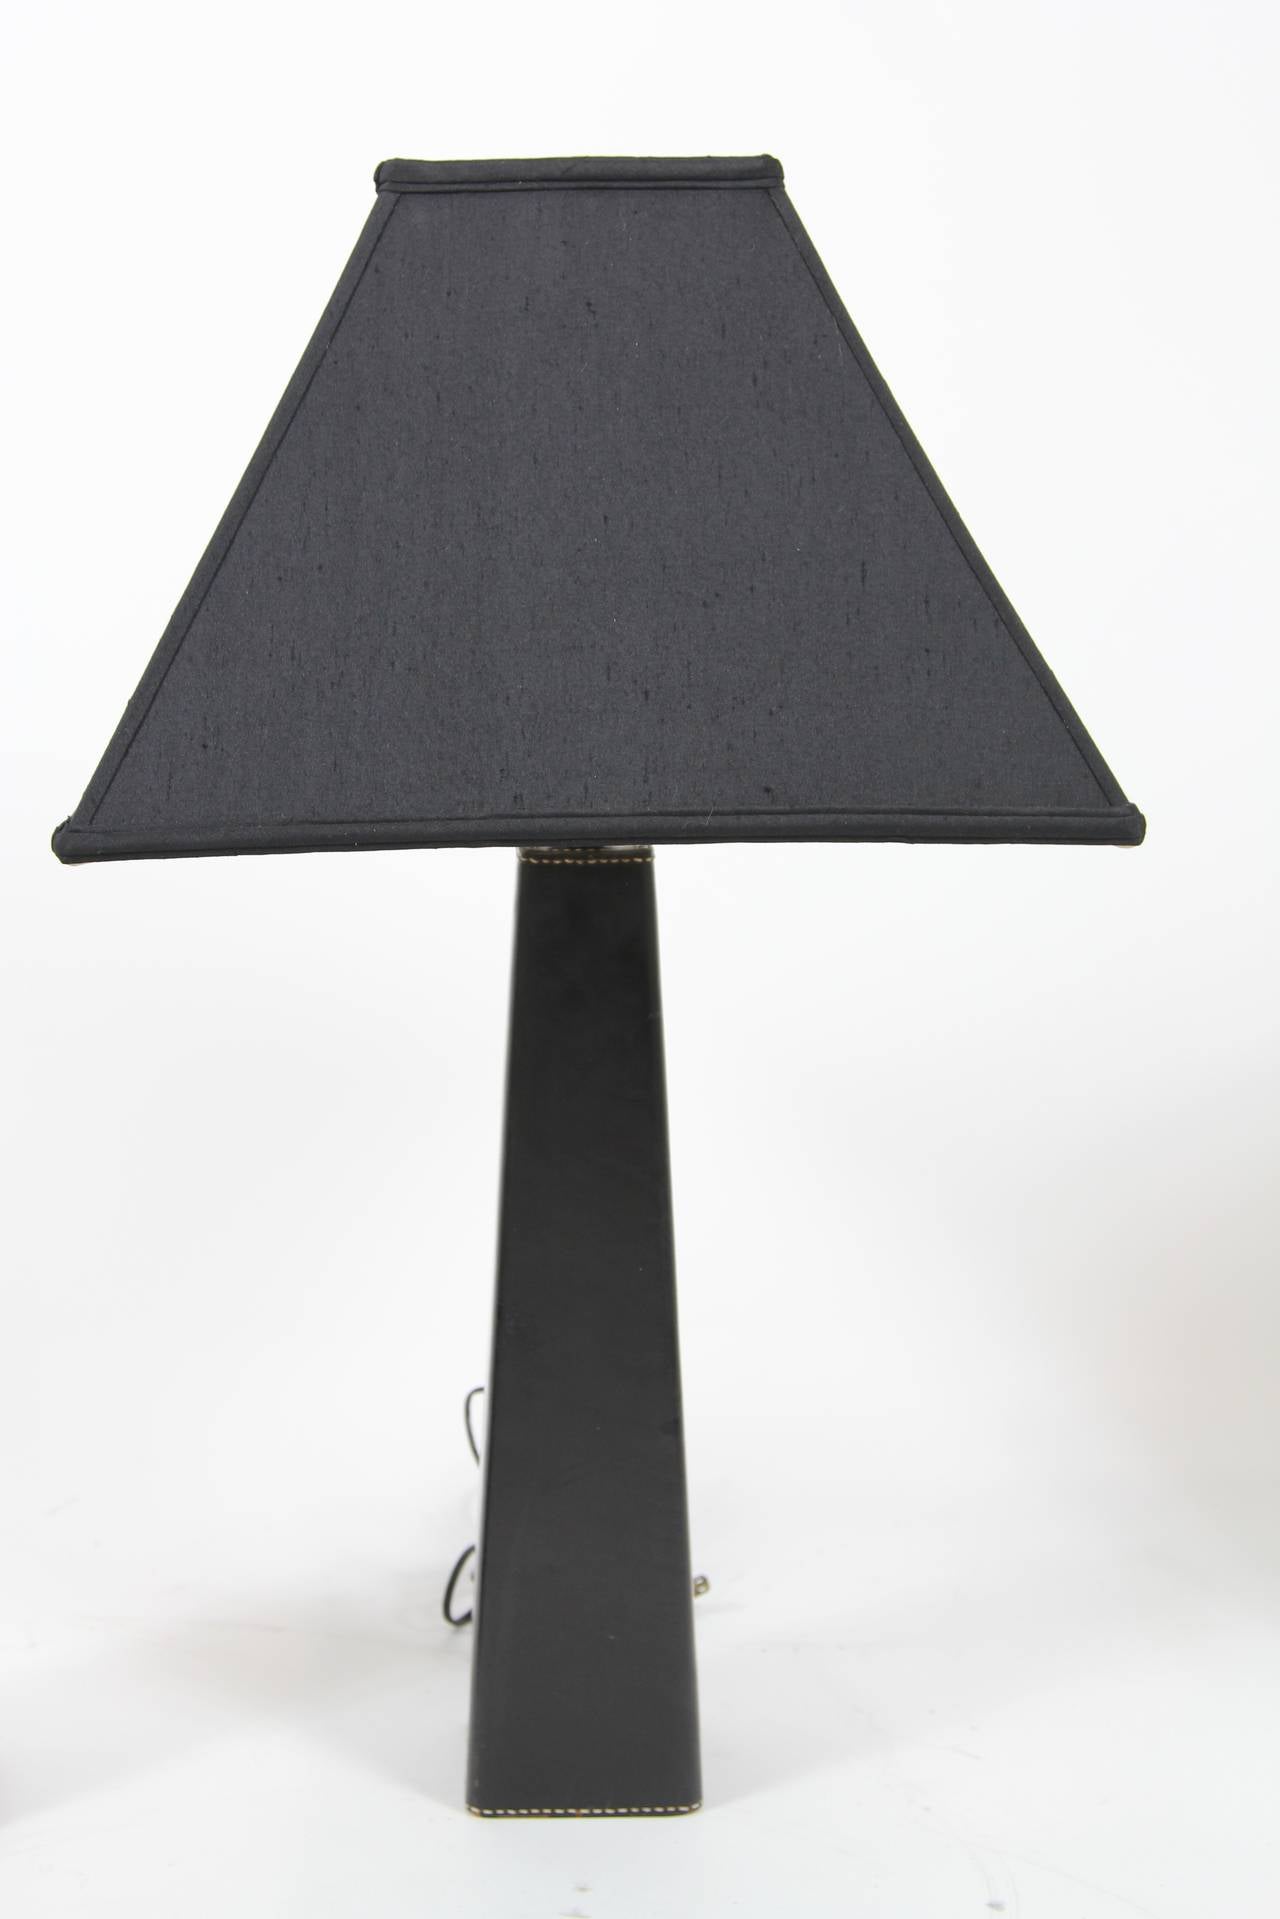 Fabulous and unique artist-made lamps make a dramatic statement in a great room, office or study. One is black leather, the other is black/tan leather, both top-stitched in the back. Marked Denmark on bottom. New black hand-tailored square-edge